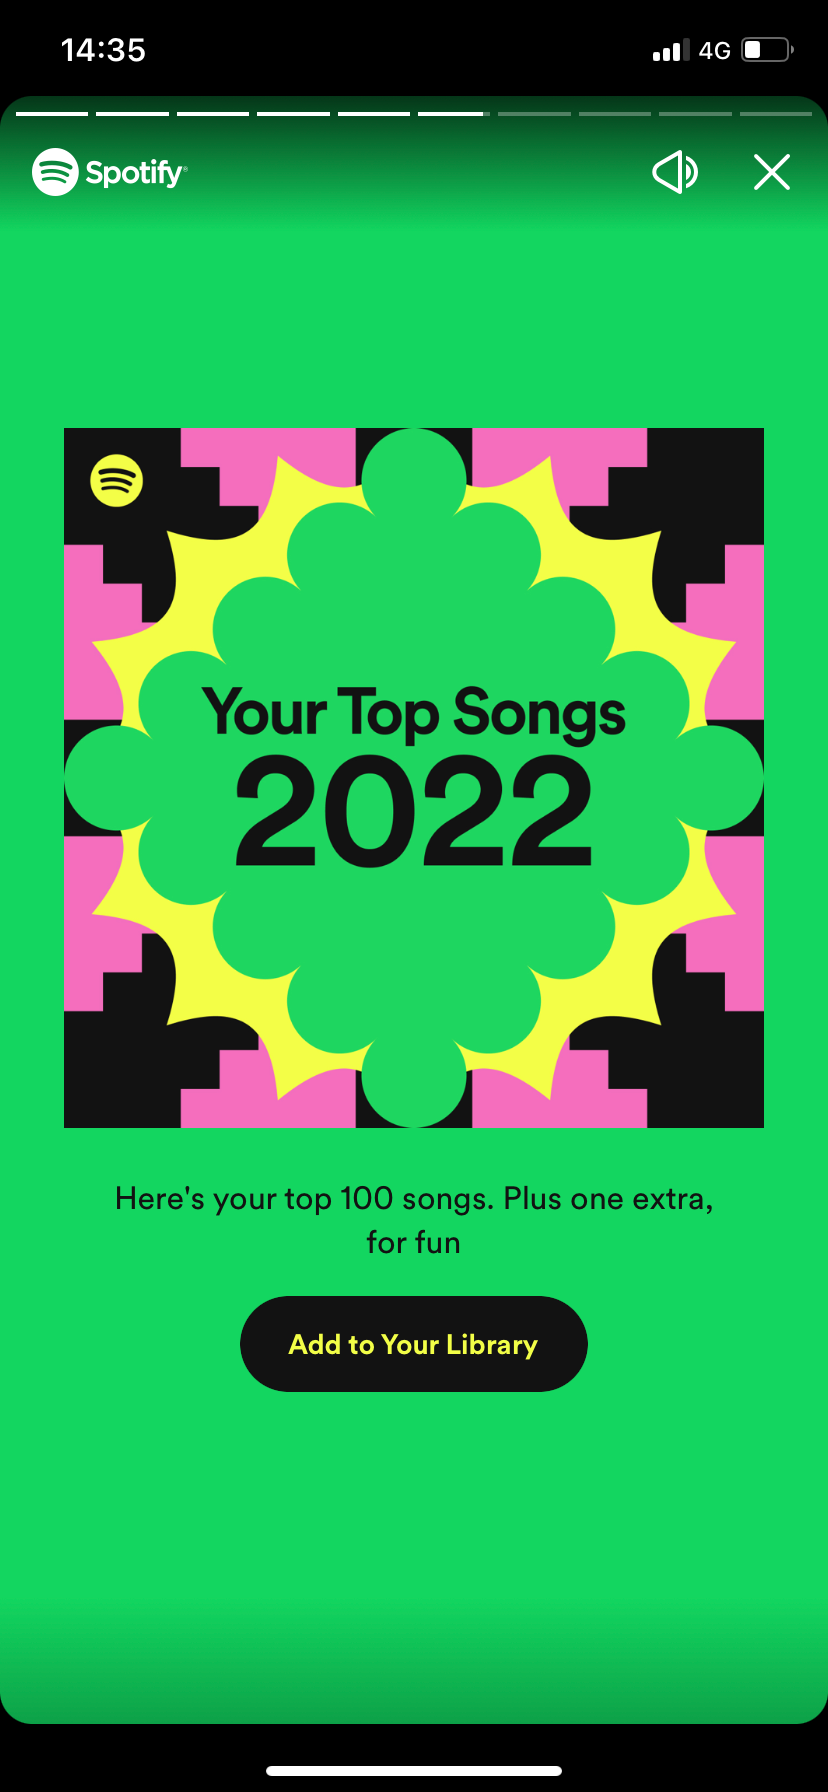 How to get your Spotify Wrapped 2022 playlist